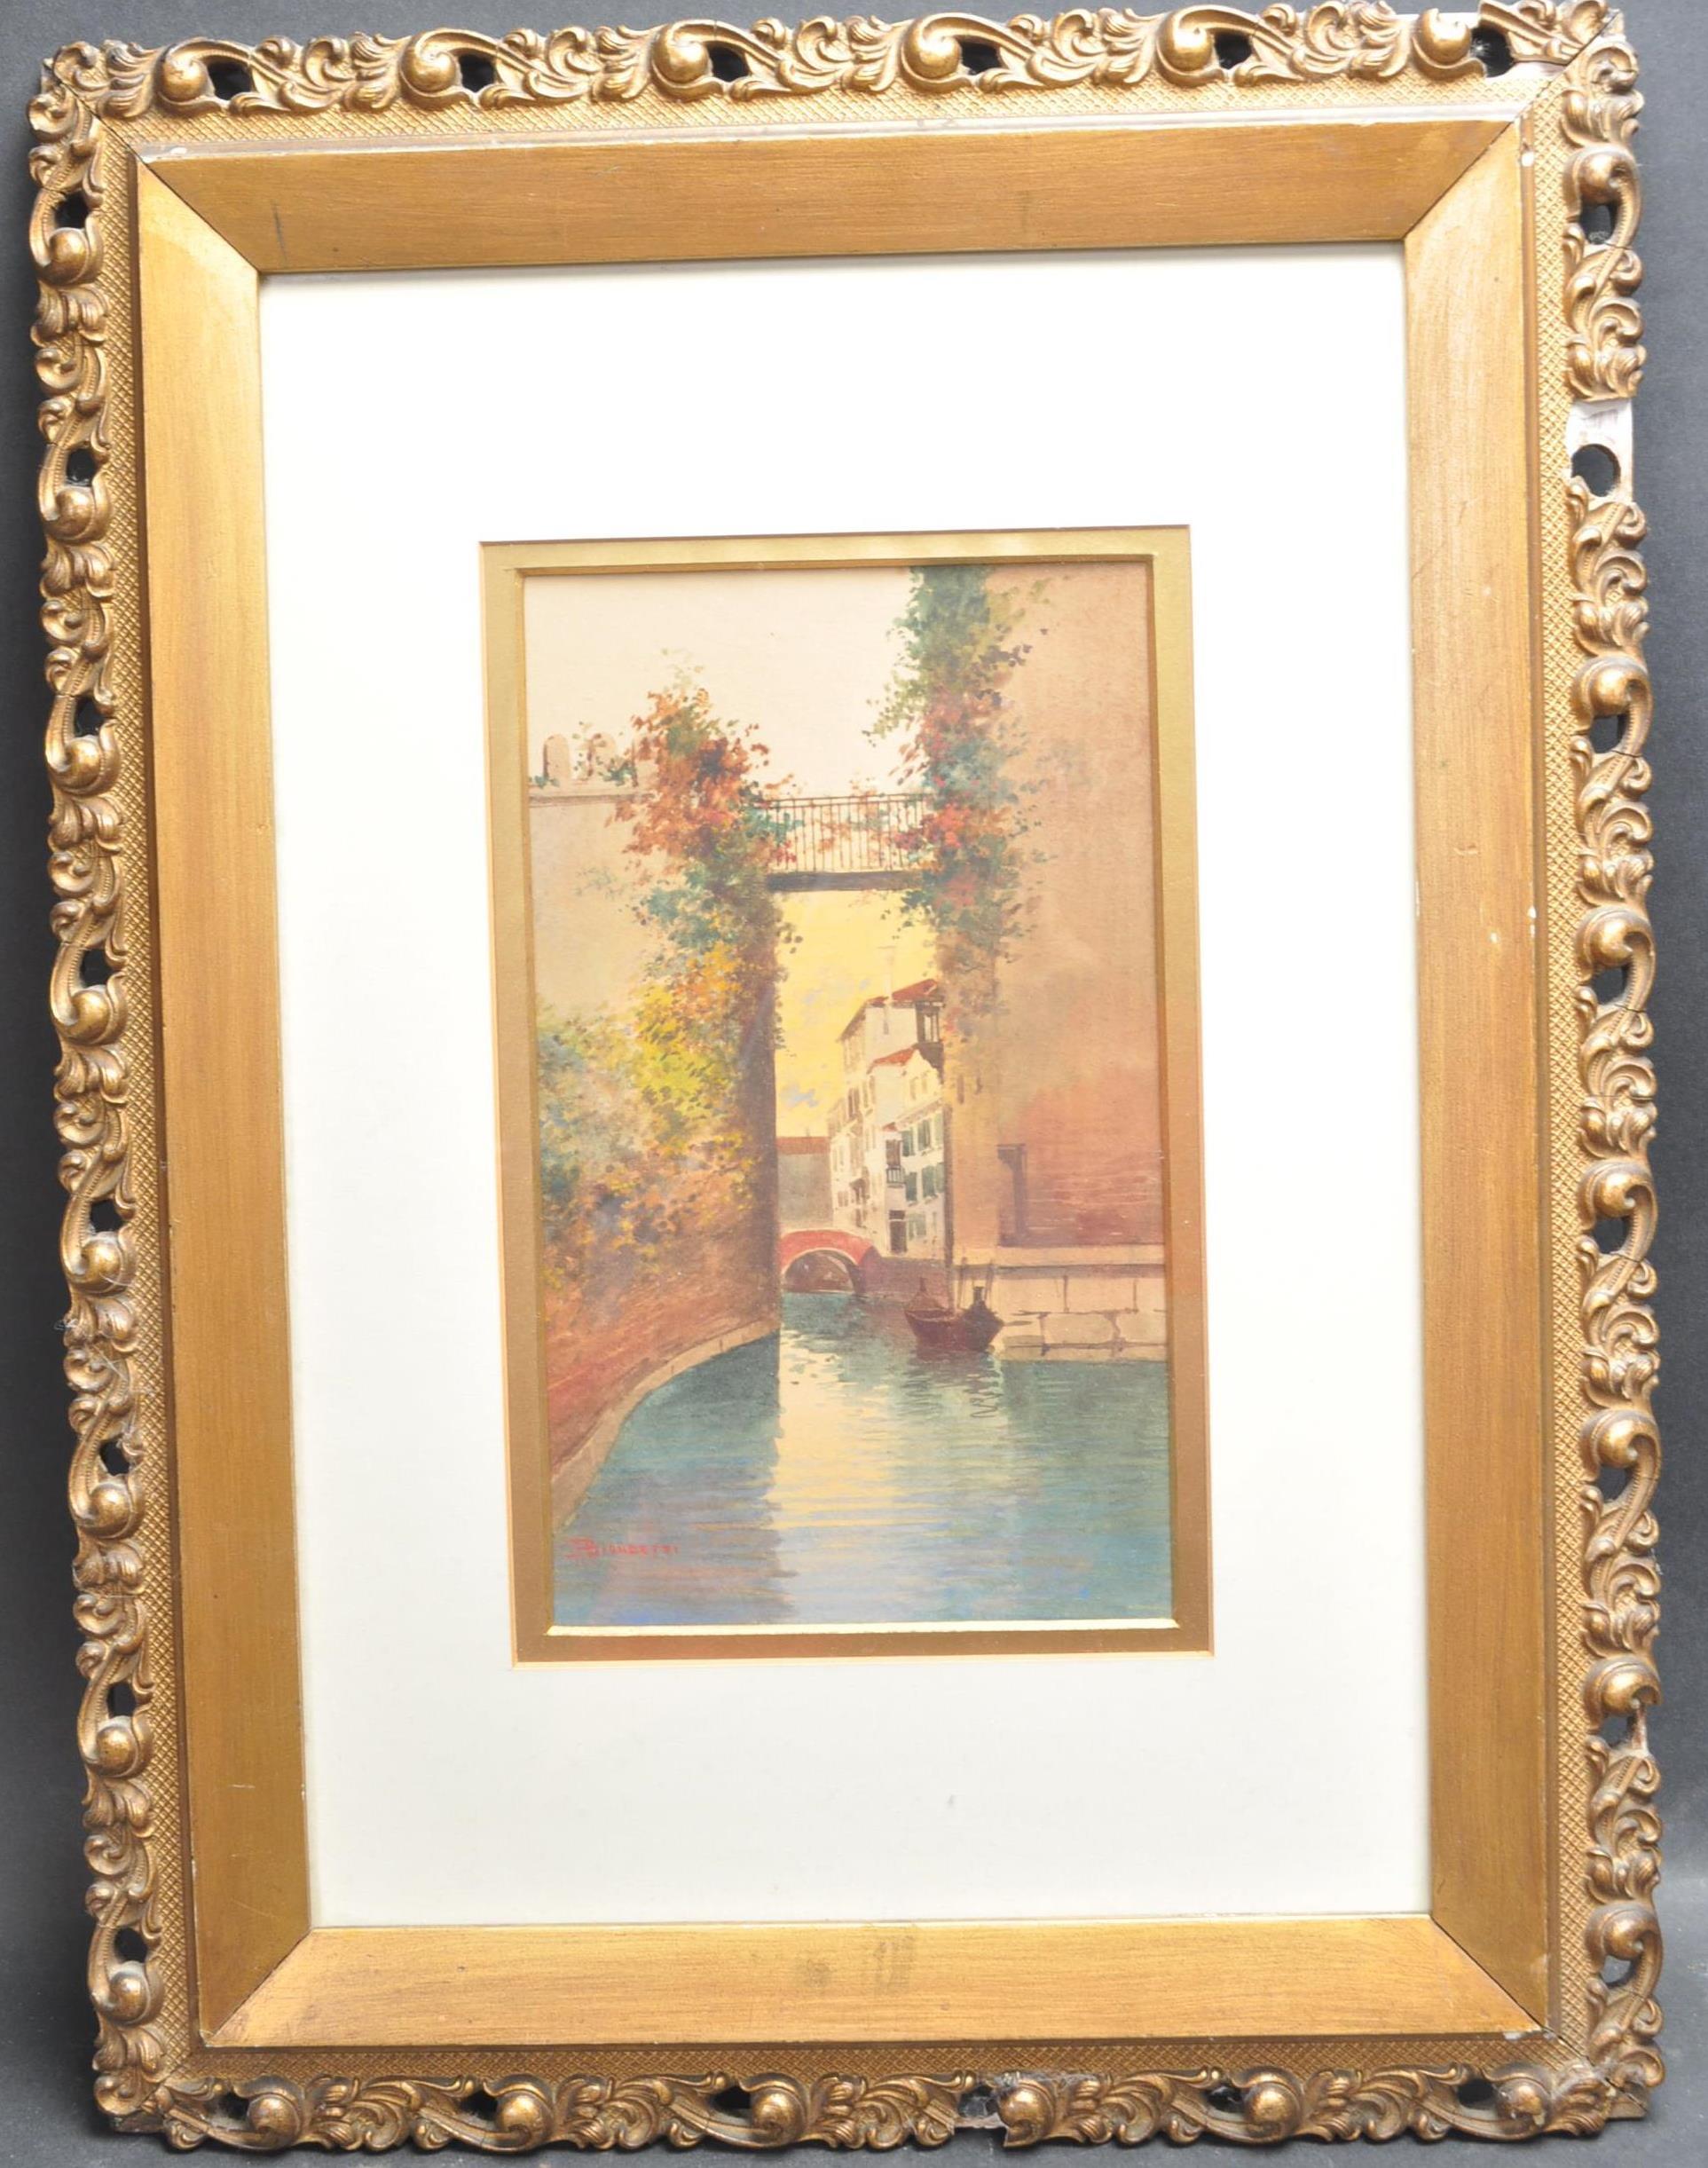 BIONDETTI - WATERCOLOUR PAINTING OF A VENICE CANAL